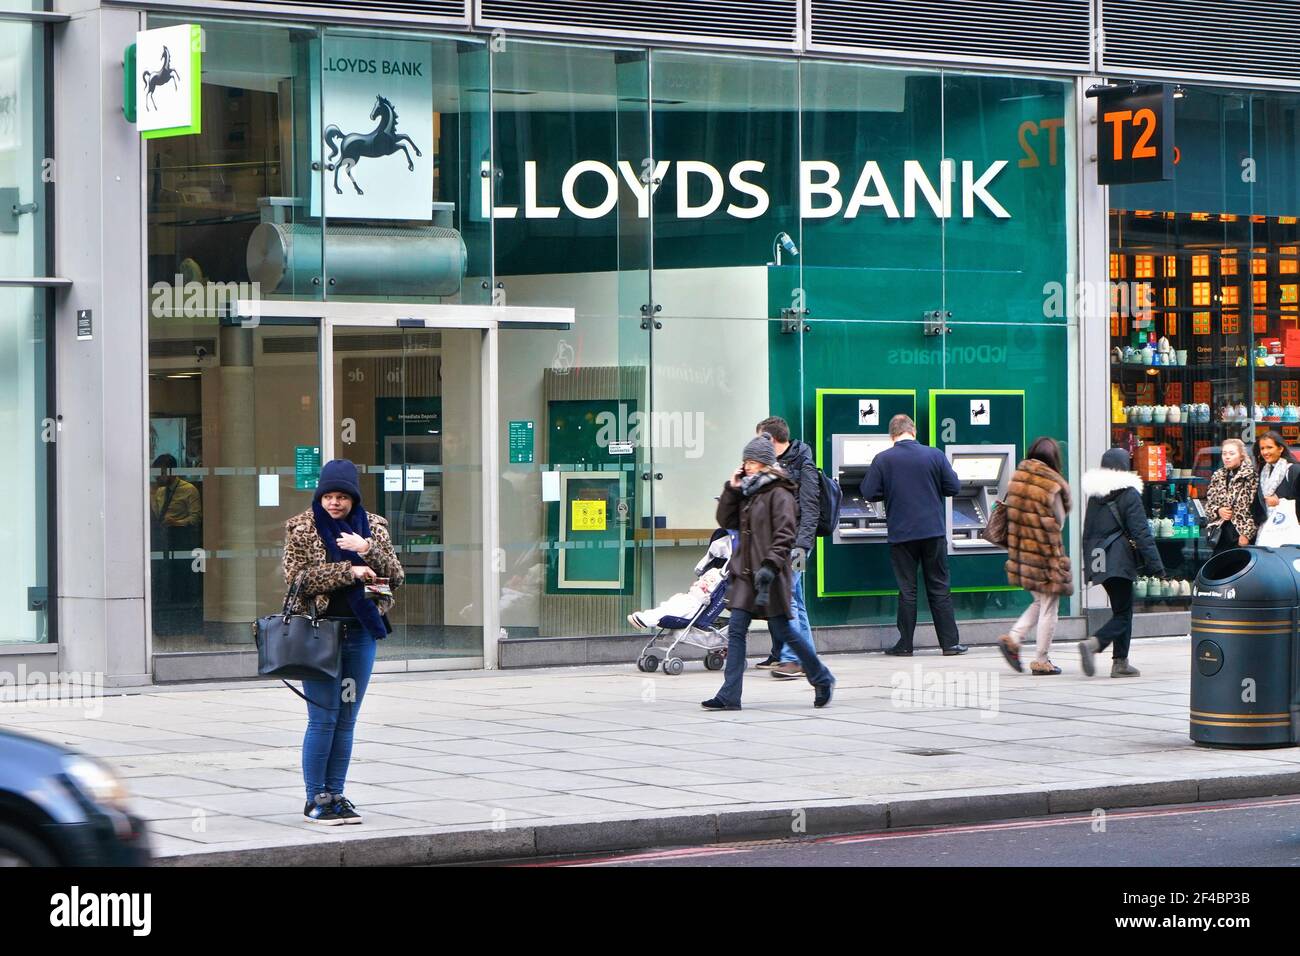 London, United Kingdom - February 02, 2019: People walk in front of Lloyds Bank branch at Victoria. It is British retail and commercial bank founded 1 Stock Photo